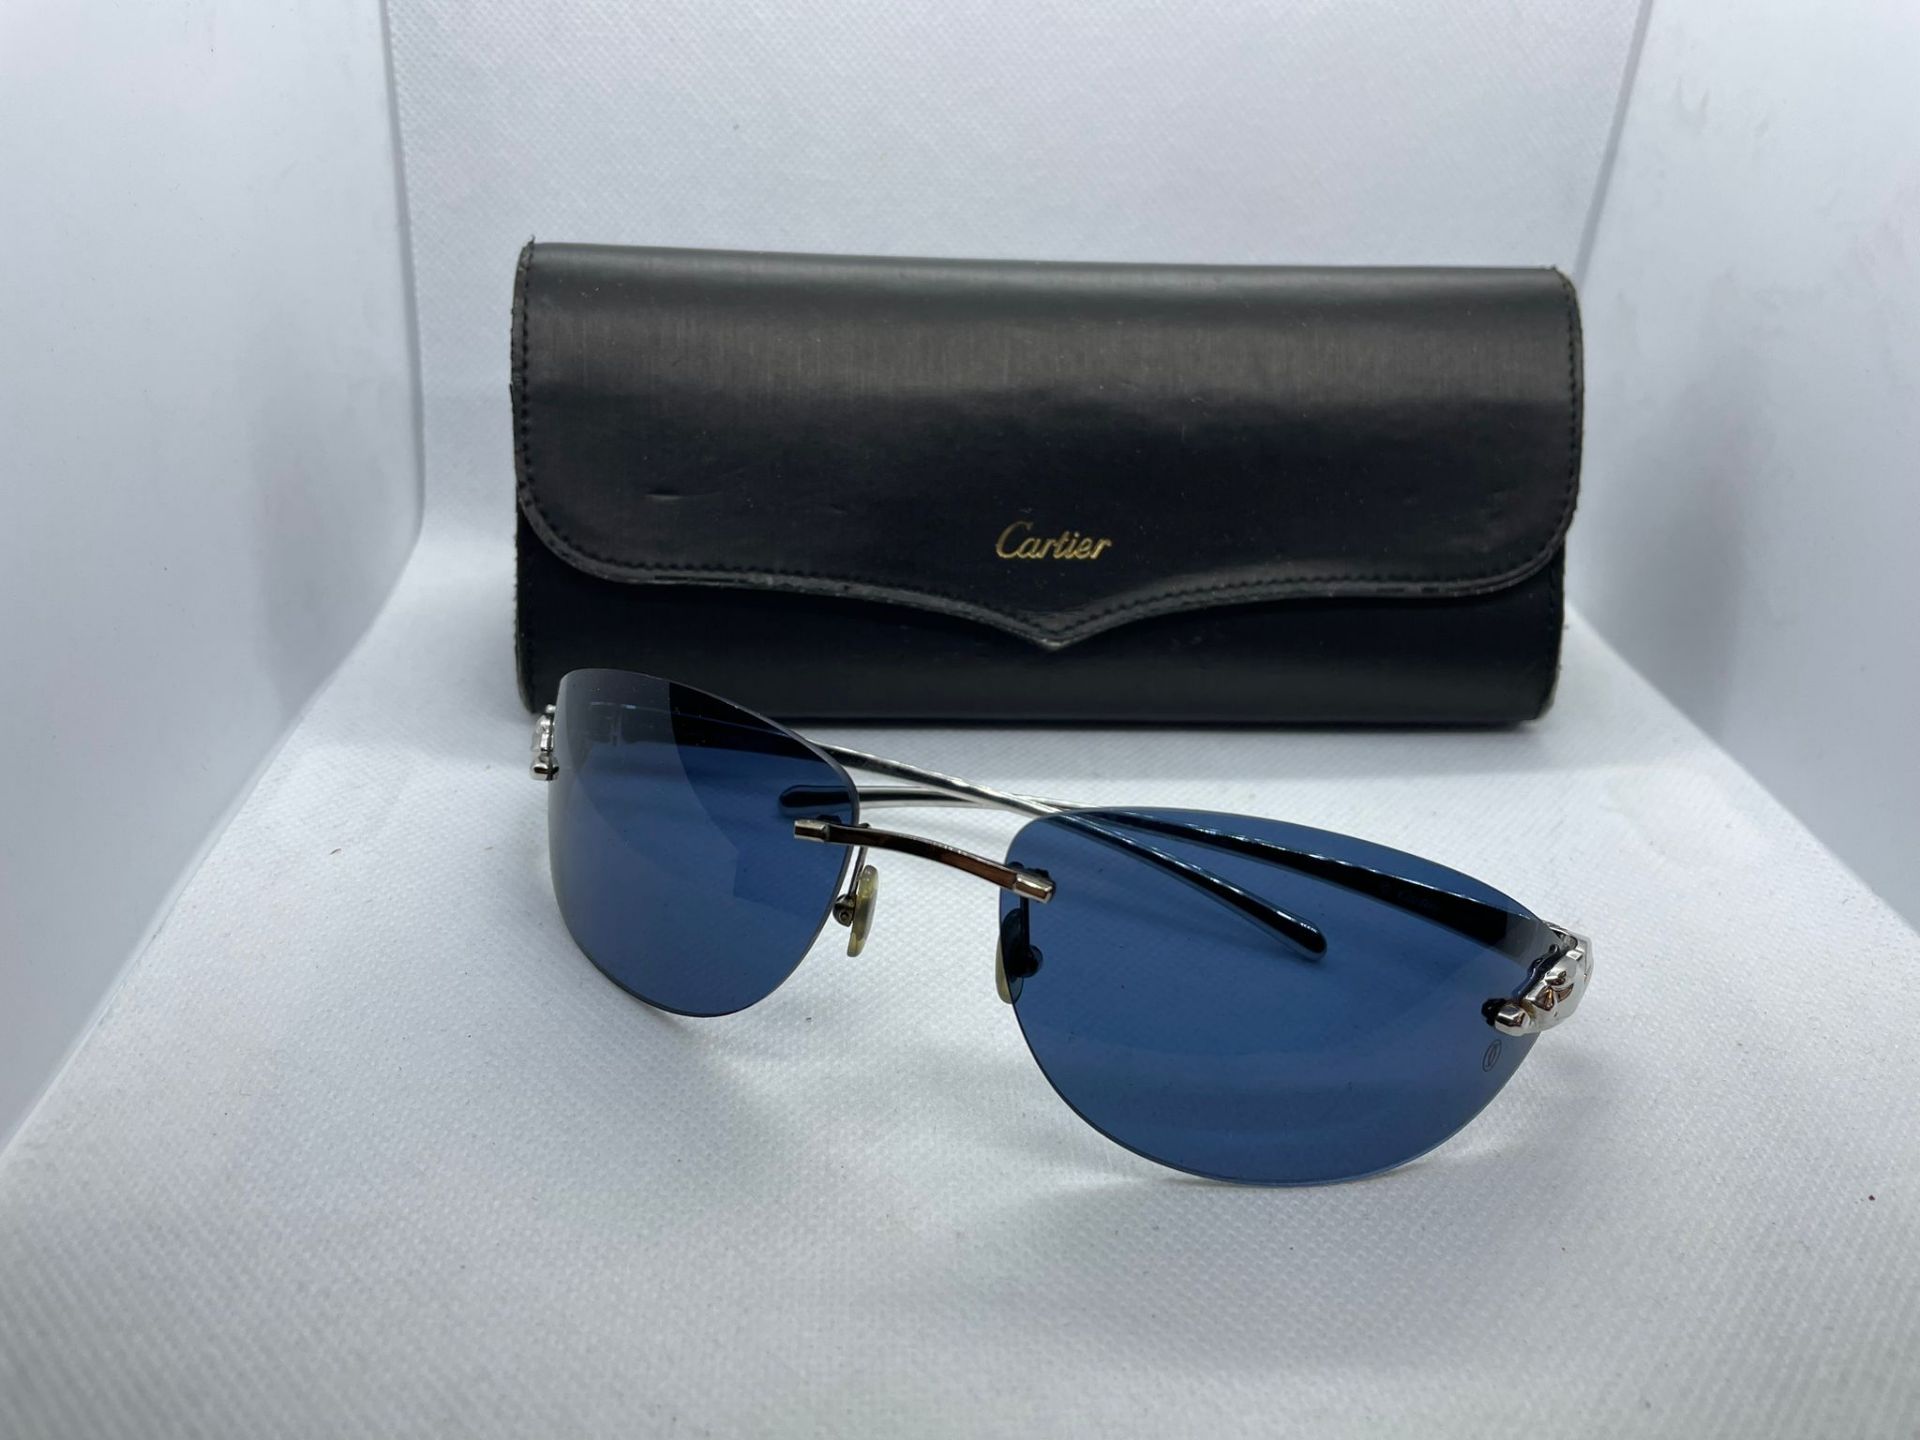 Cartier Panthere sunglasses - Image 6 of 6